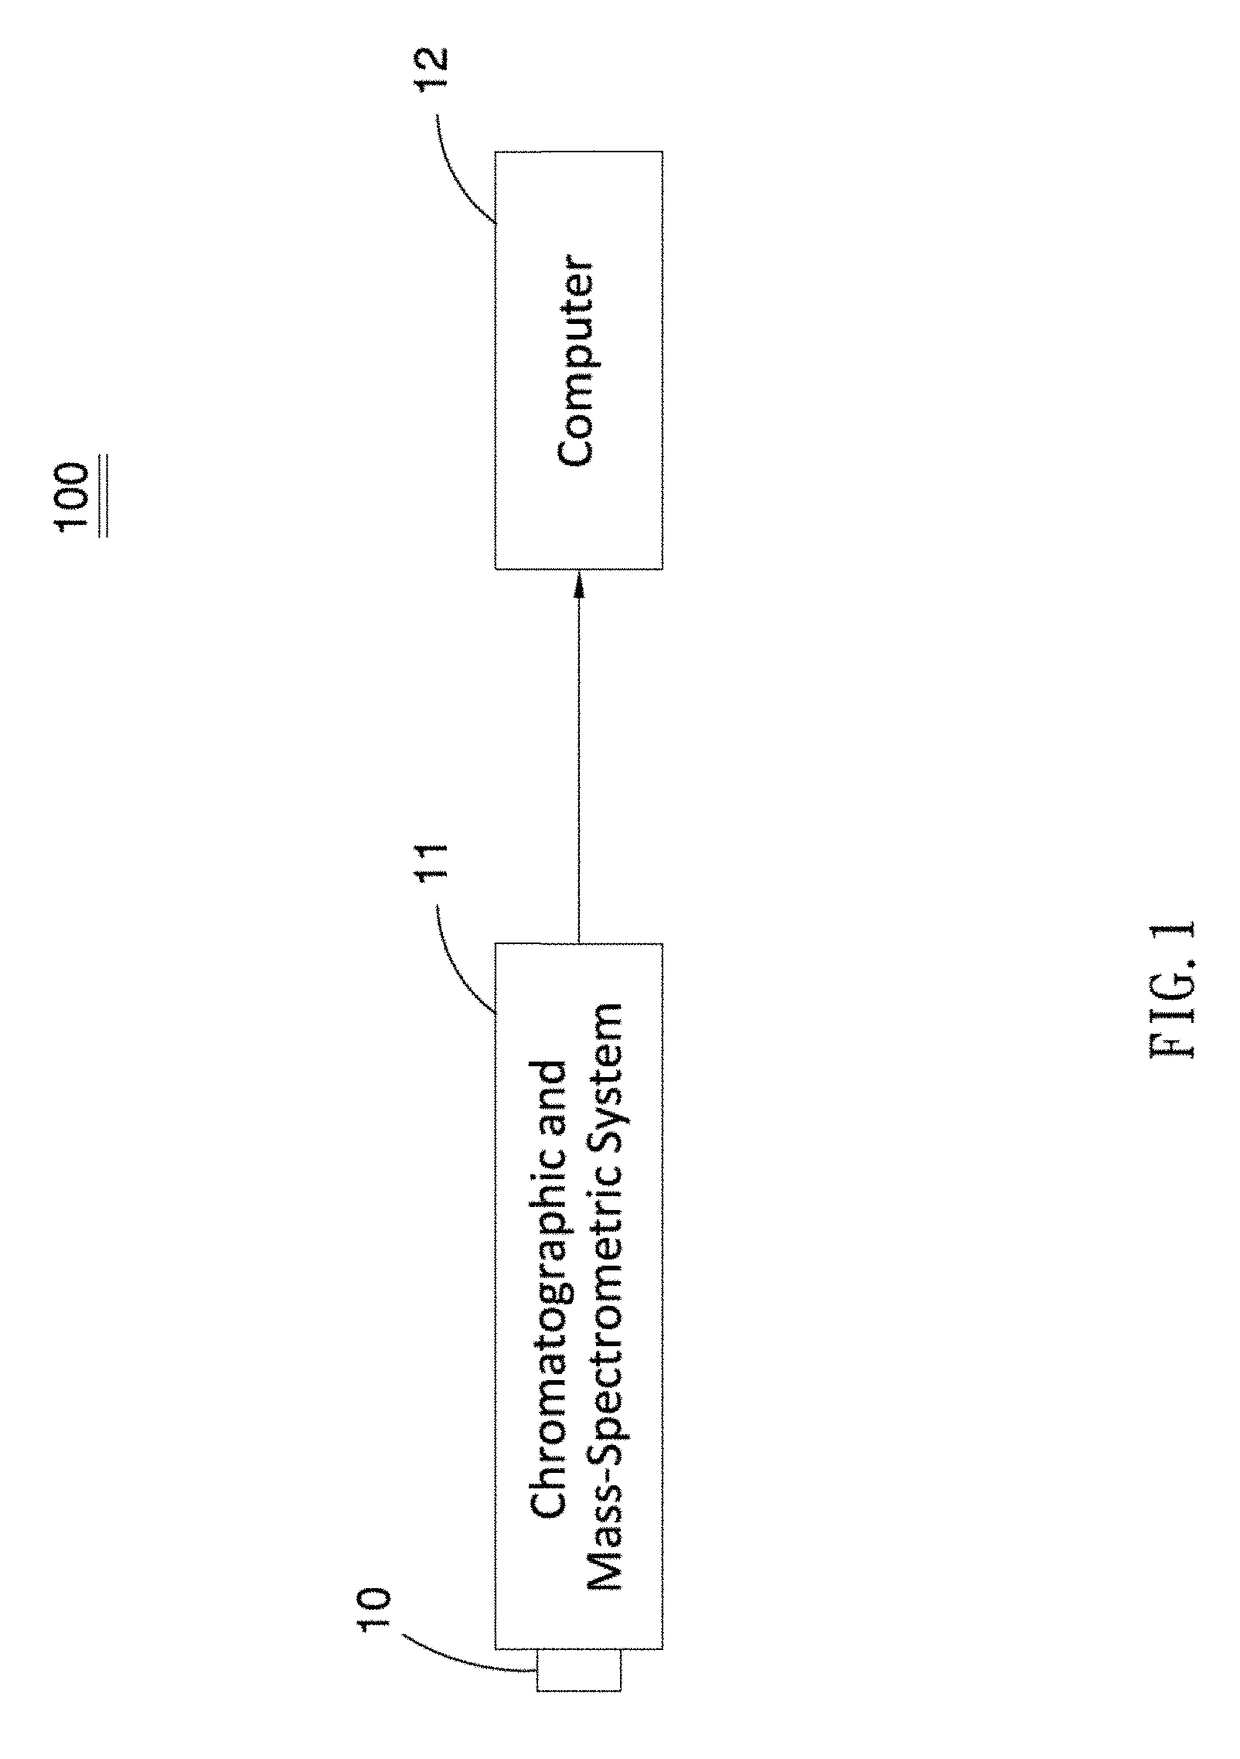 Method and system for detecting pesticide residue in agricultural products using mass spectrometry imaging analysis